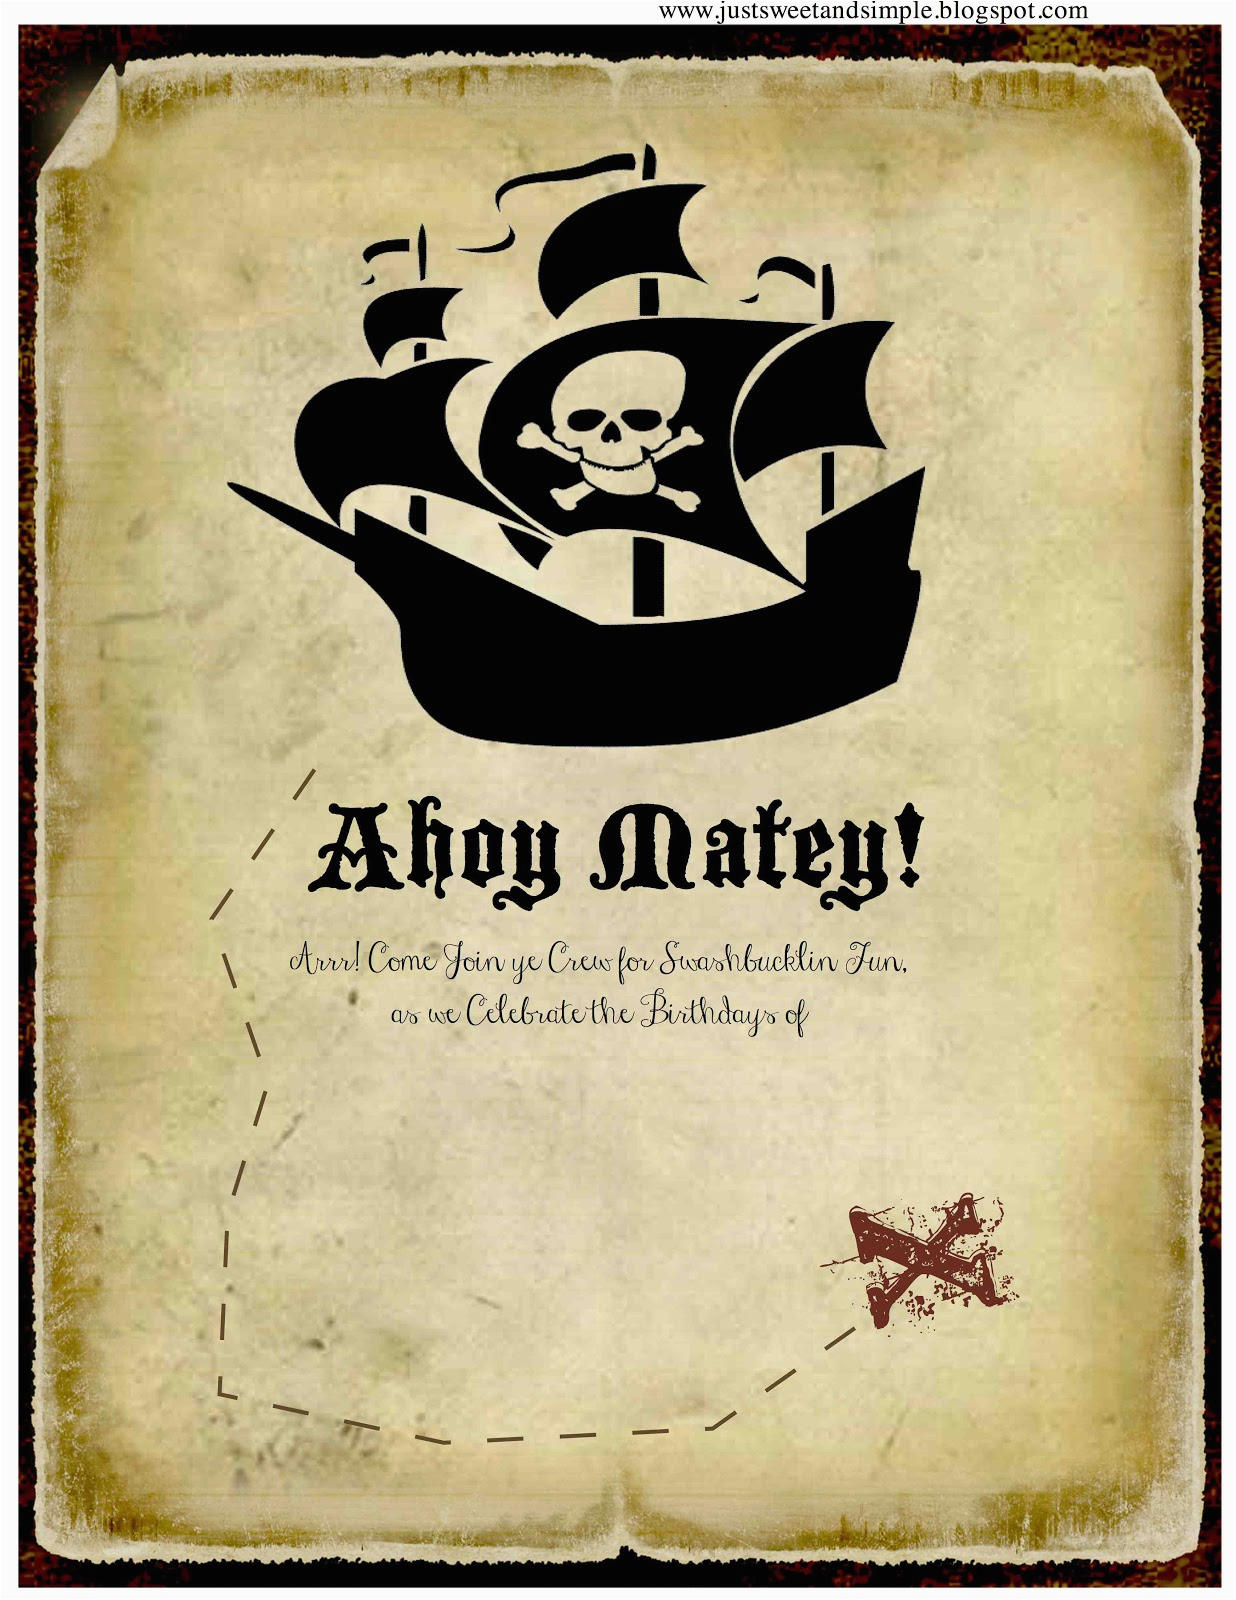 pirate party invitations